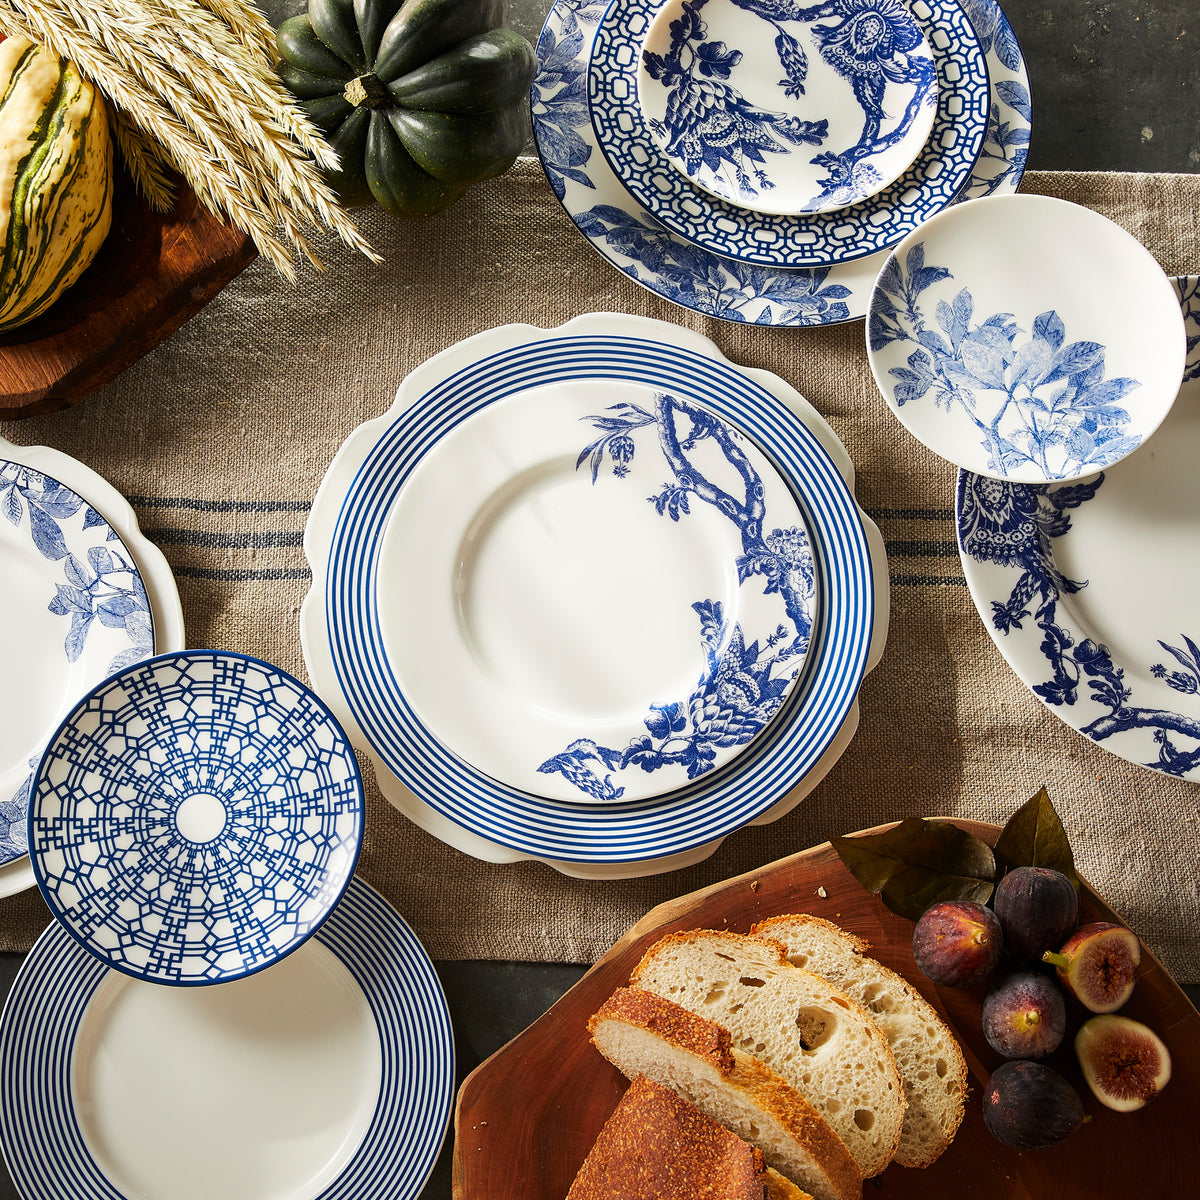 A variety of heirloom-quality dinnerware with blue and white patterns is arranged on a beige tablecloth, next to bread, figs, and a couple of gourds, including Arbor Blue Small Plates by Caskata Artisanal Home.